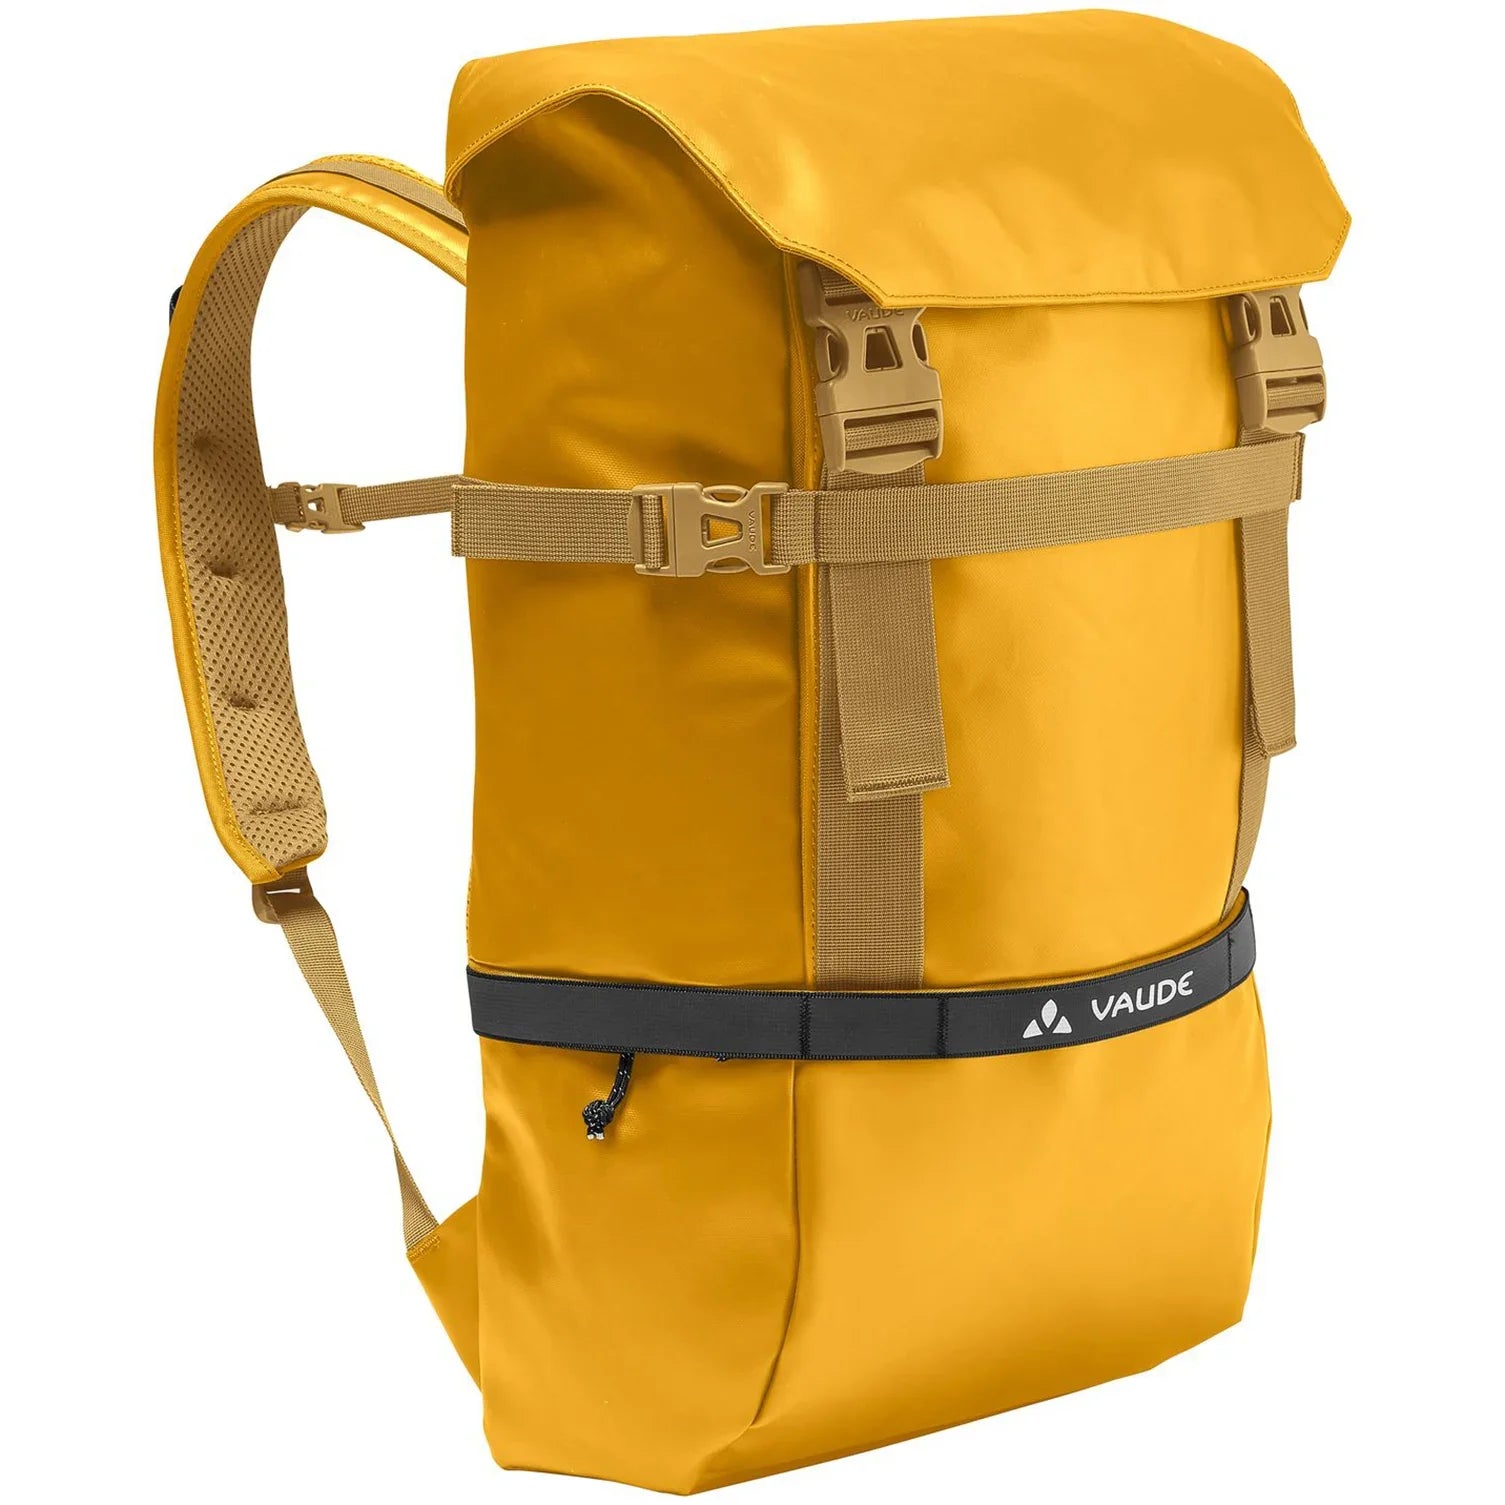 Vaude Mineo Backpack 30 City Backpack 48 cm - Burnt Yellow